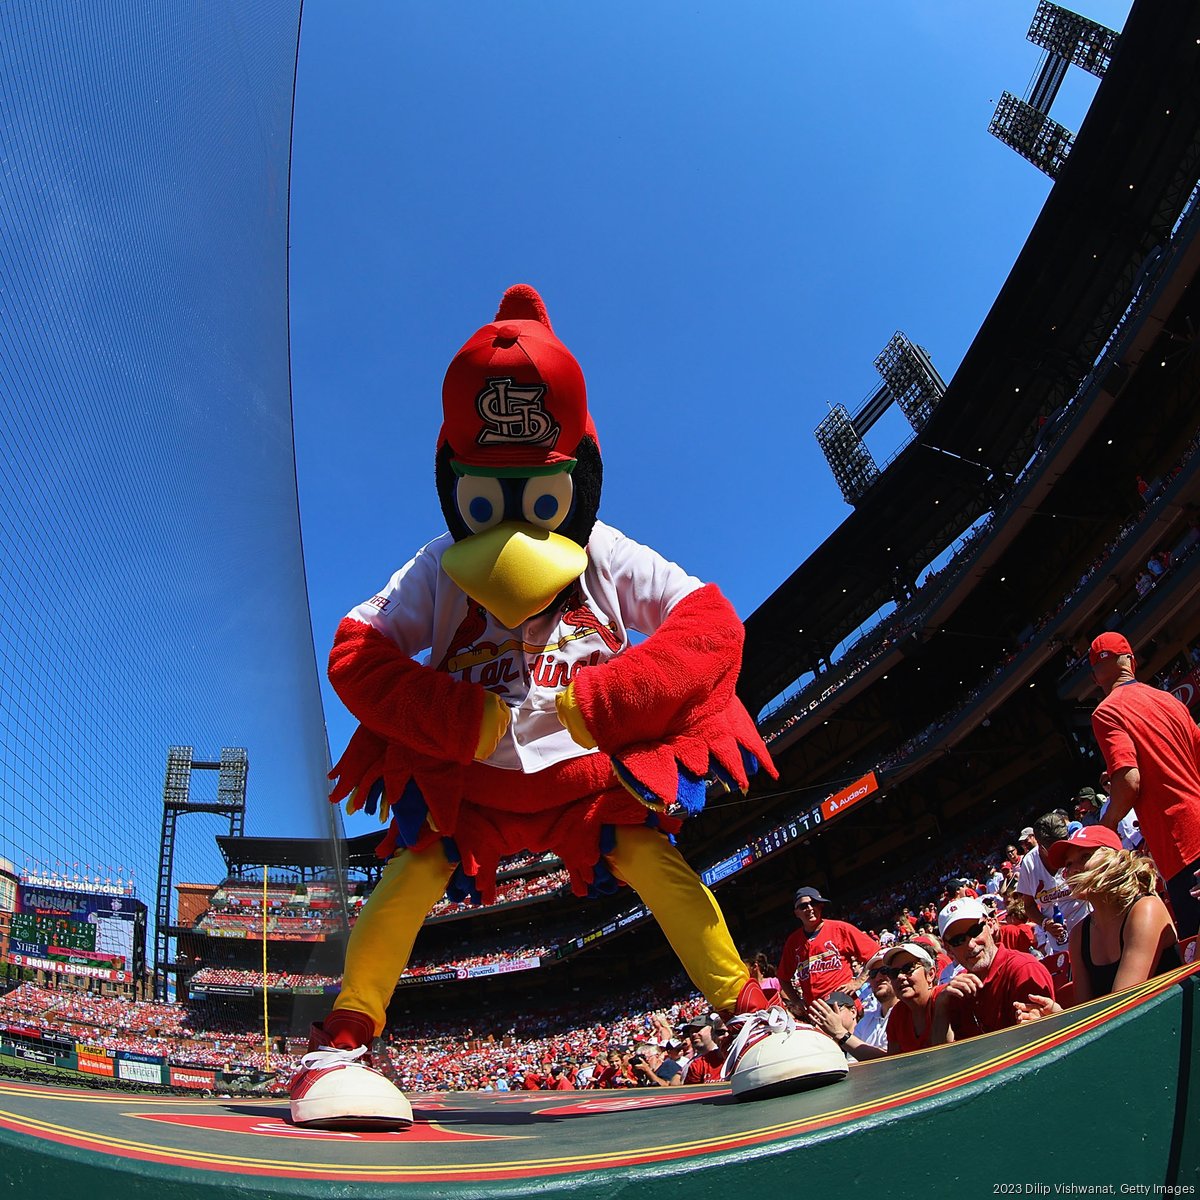 St. Louis Cardinals to expand front office roles in next three years